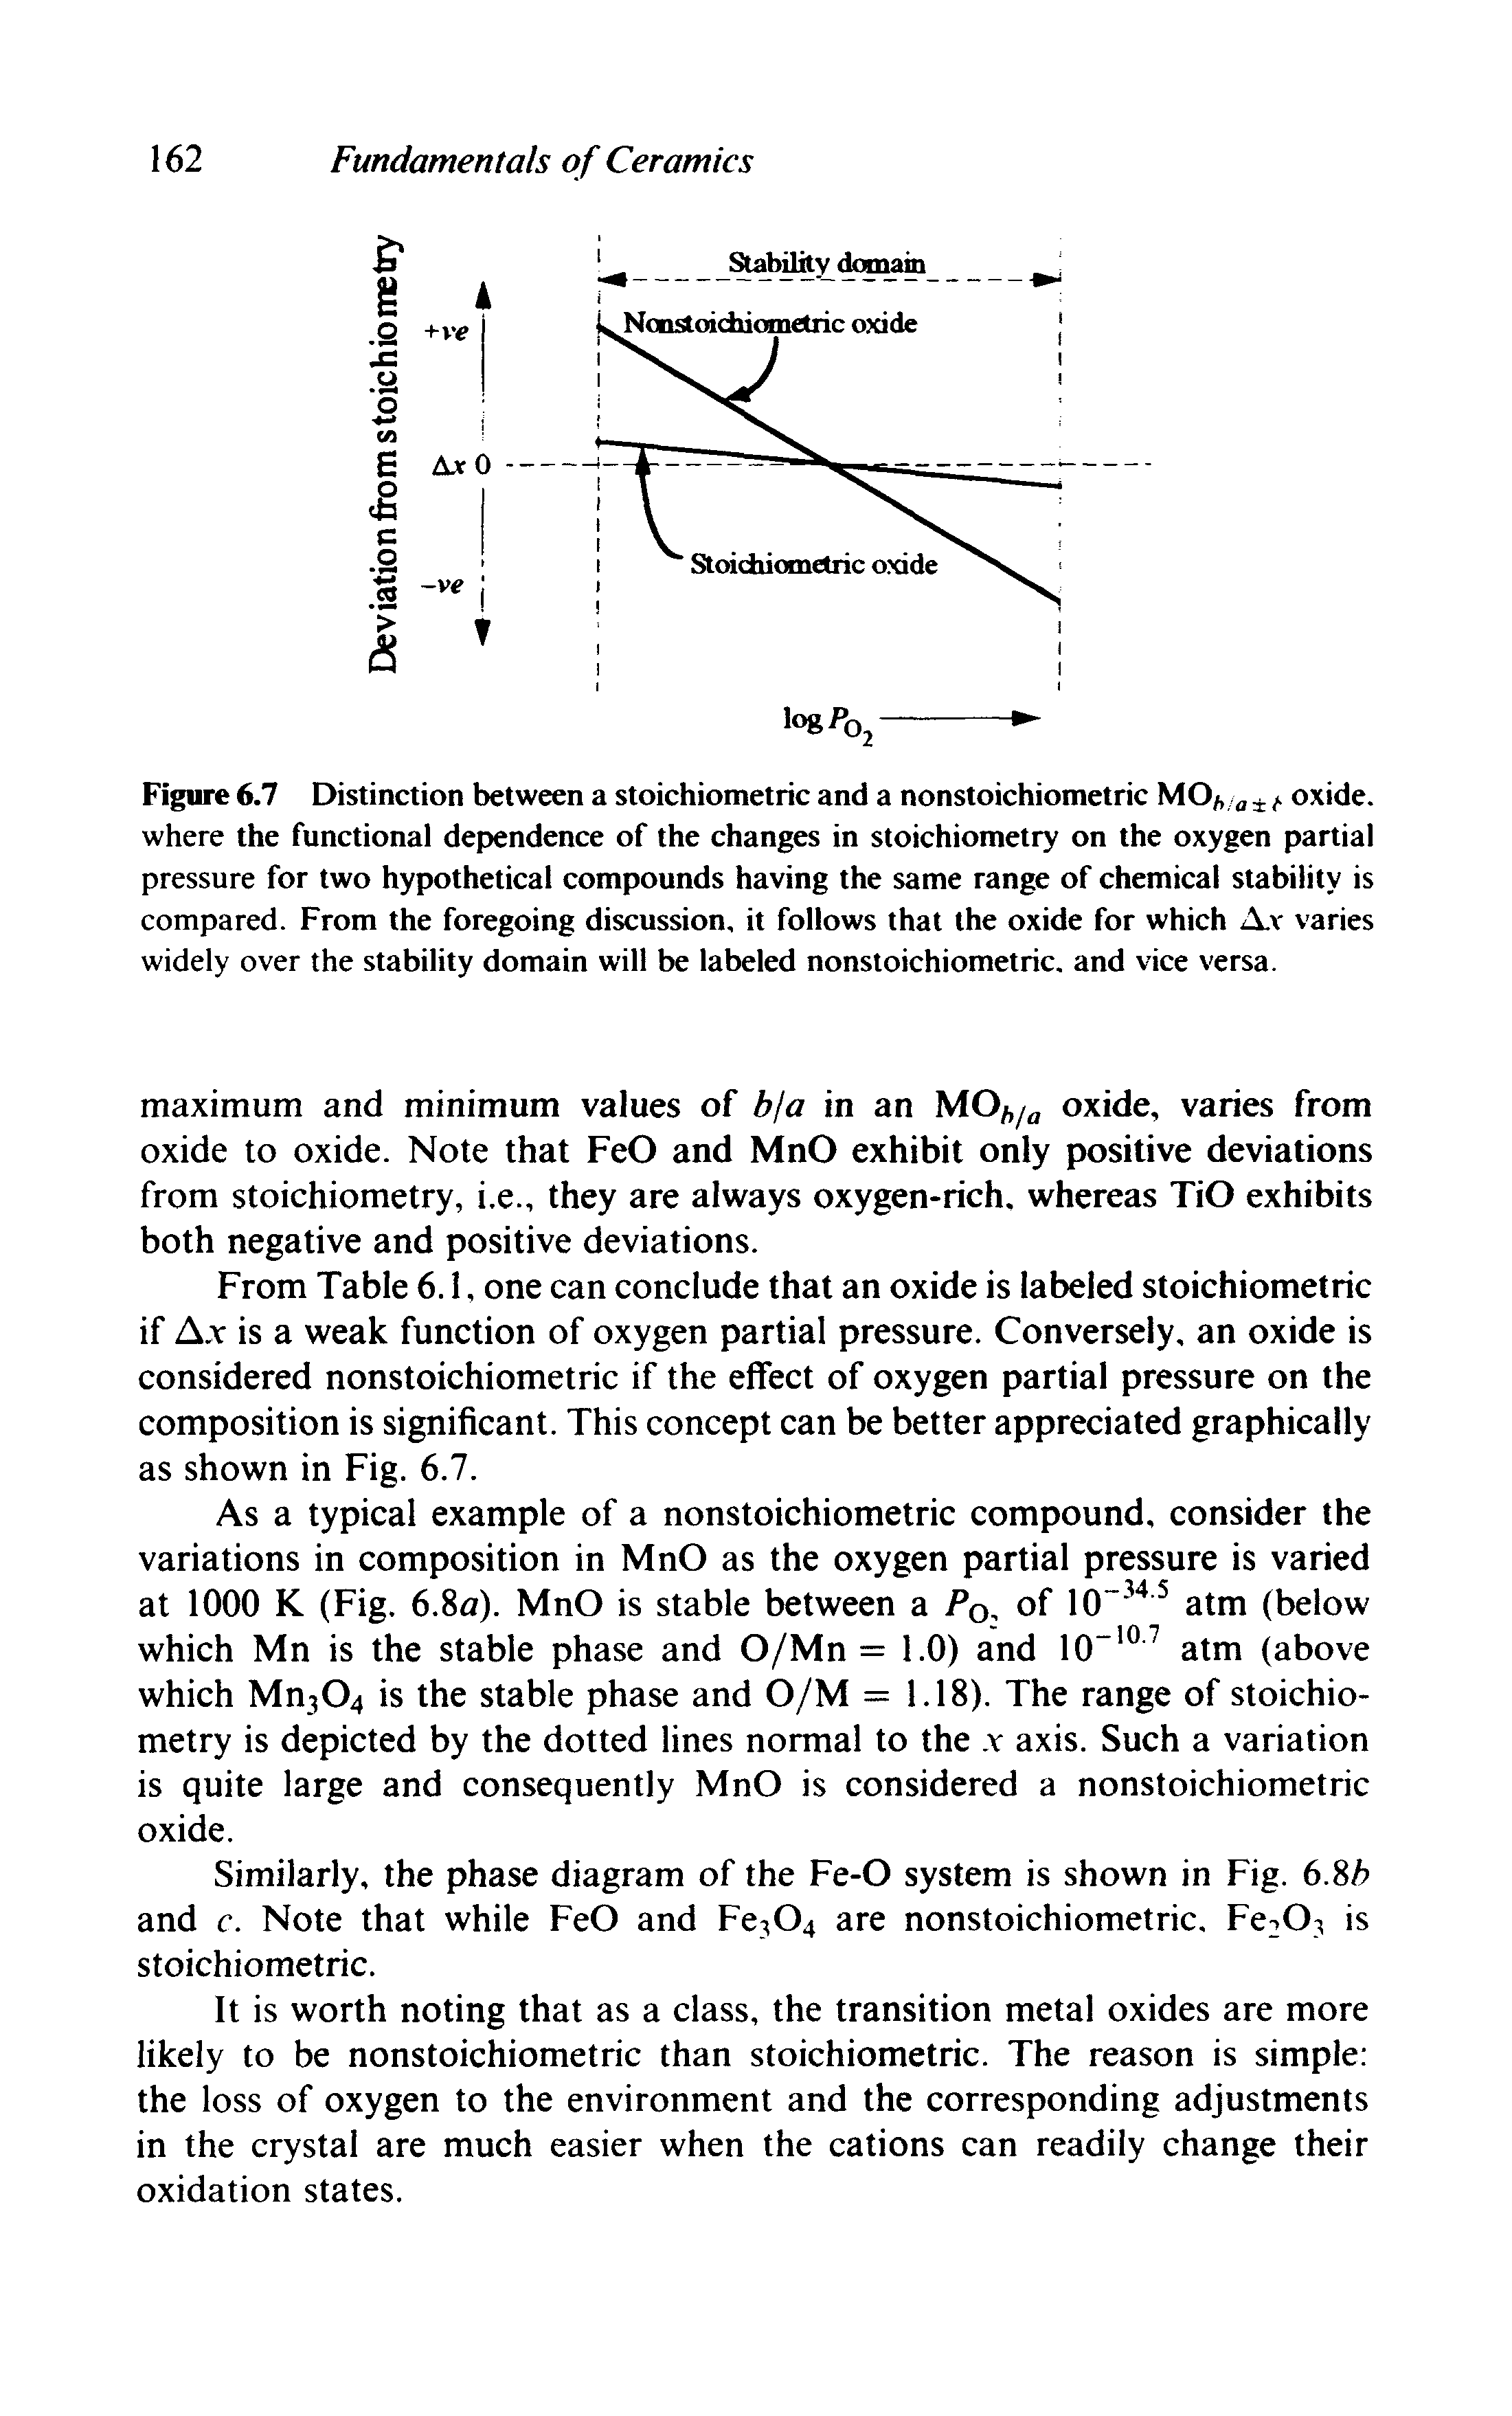 Figure 6.7 Distinction between a stoichiometric and a nonstoichiometric MO/, o / oxide, where the functional dependence of the changes in stoichiometry on the oxygen partial pressure for two hypothetical compounds having the same range of chemical stability is compared. From the foregoing discussion, it follows that the oxide for which A.v varies widely over the stability domain will be labeled nonstoichiometric. and vice versa.